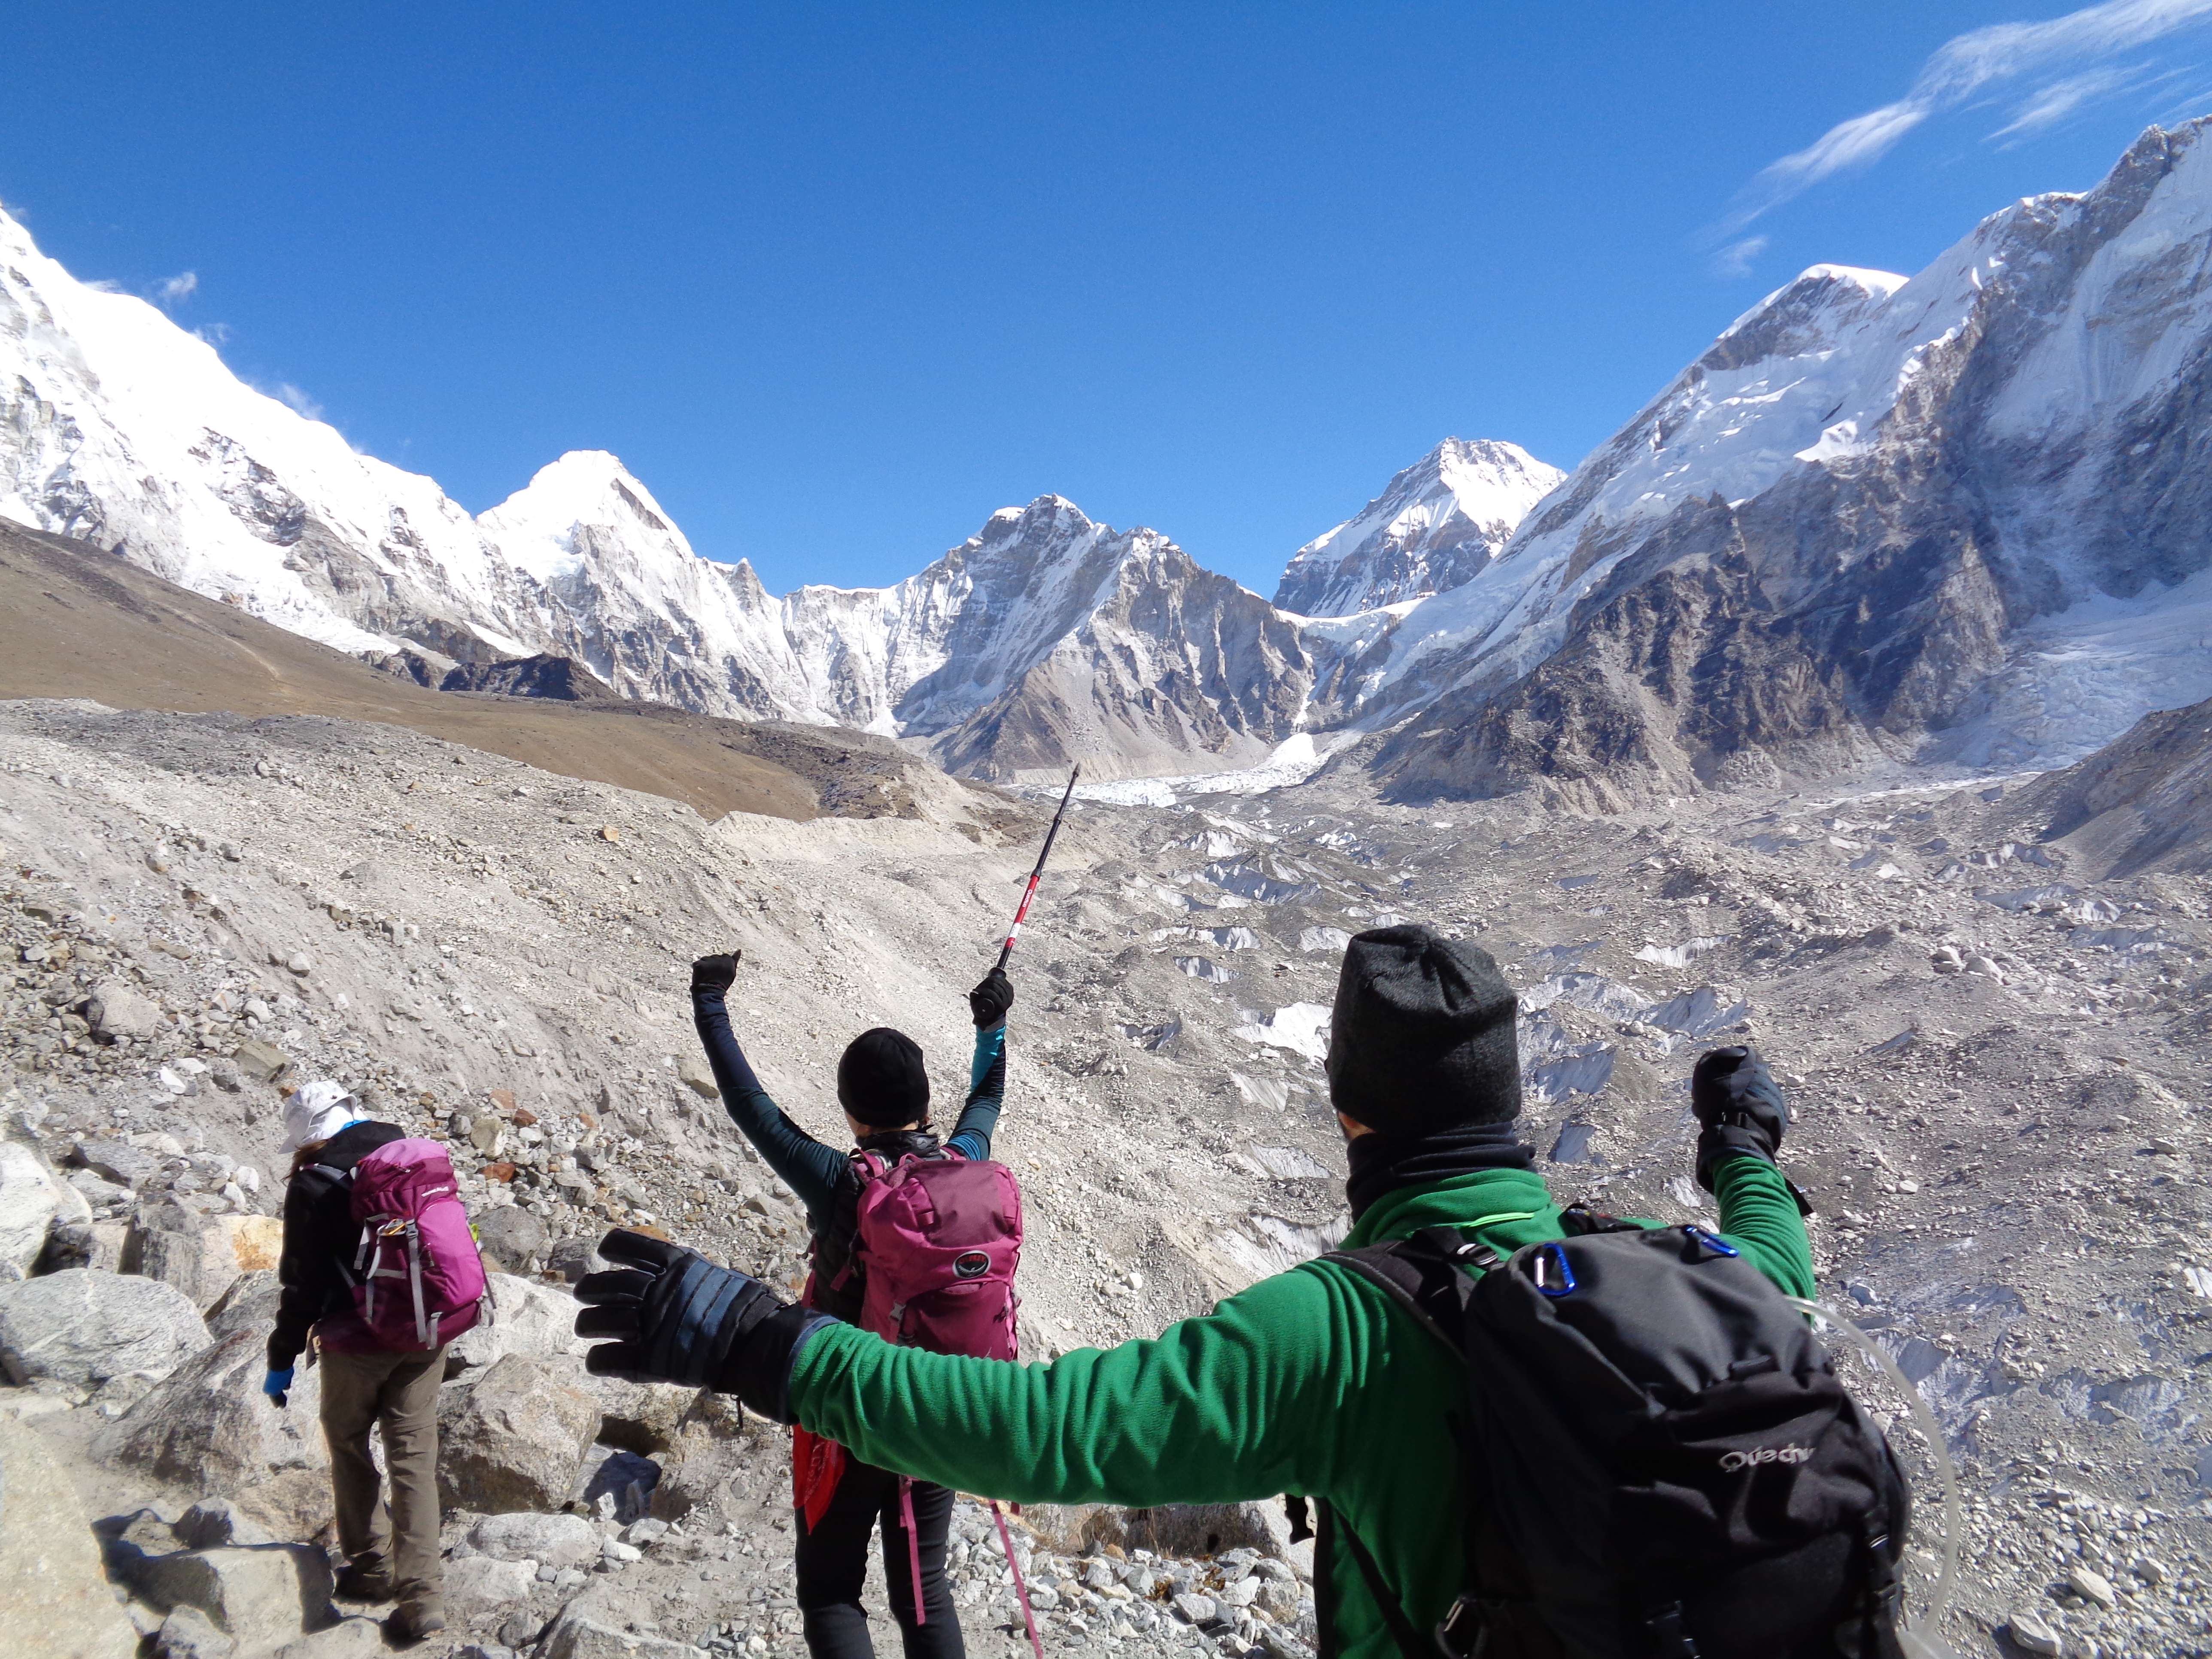 Getting closer to Everest Base Camp